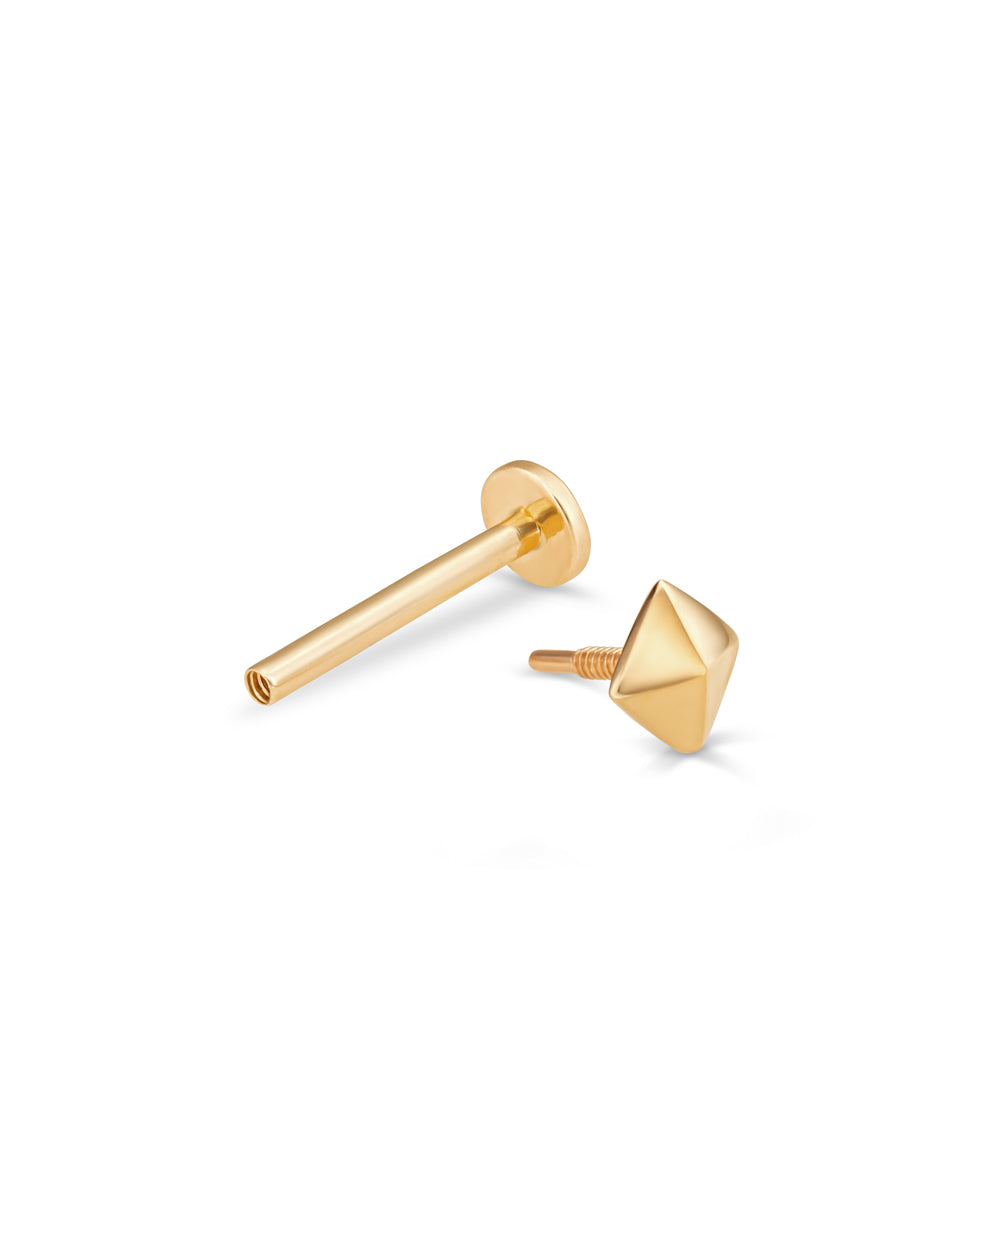 Covetear Classic Pyramid Cartilage Earring#material_14k_Yellow_Gold